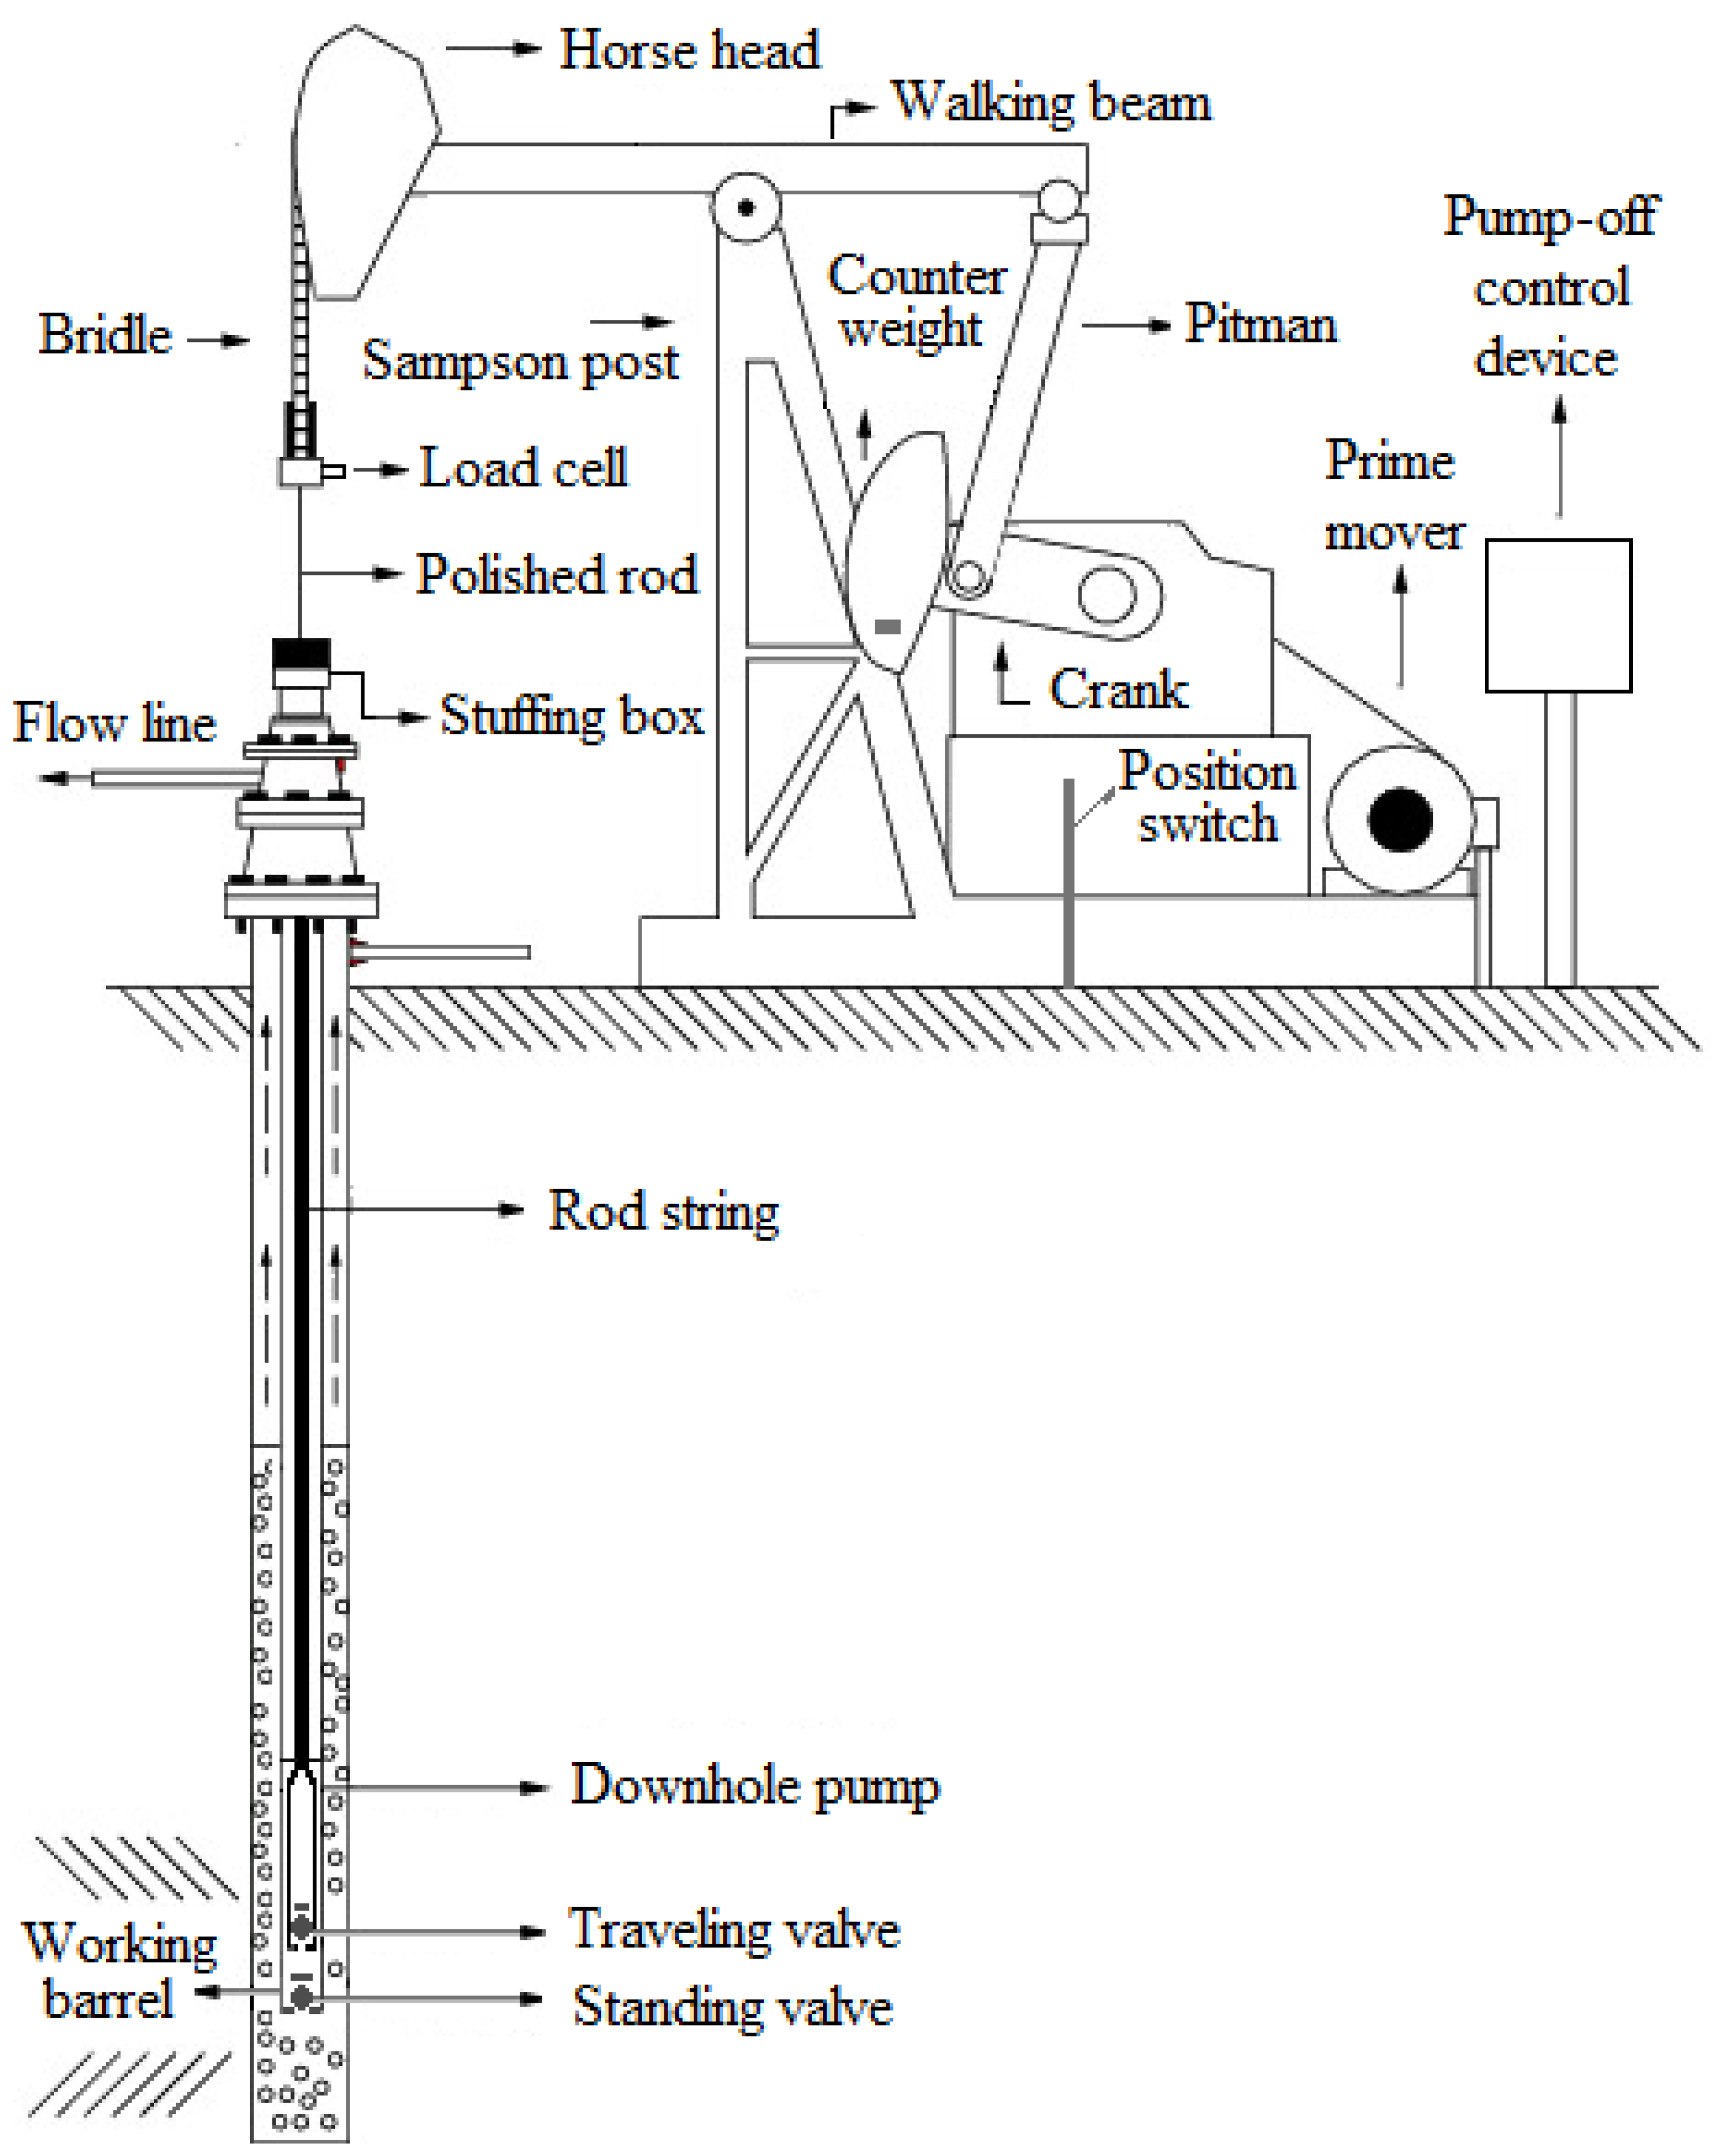 Sensors | Free | of Operation Conditions and Faults Using Machine Learning in Sucker-Rod Pumping Wells | HTML